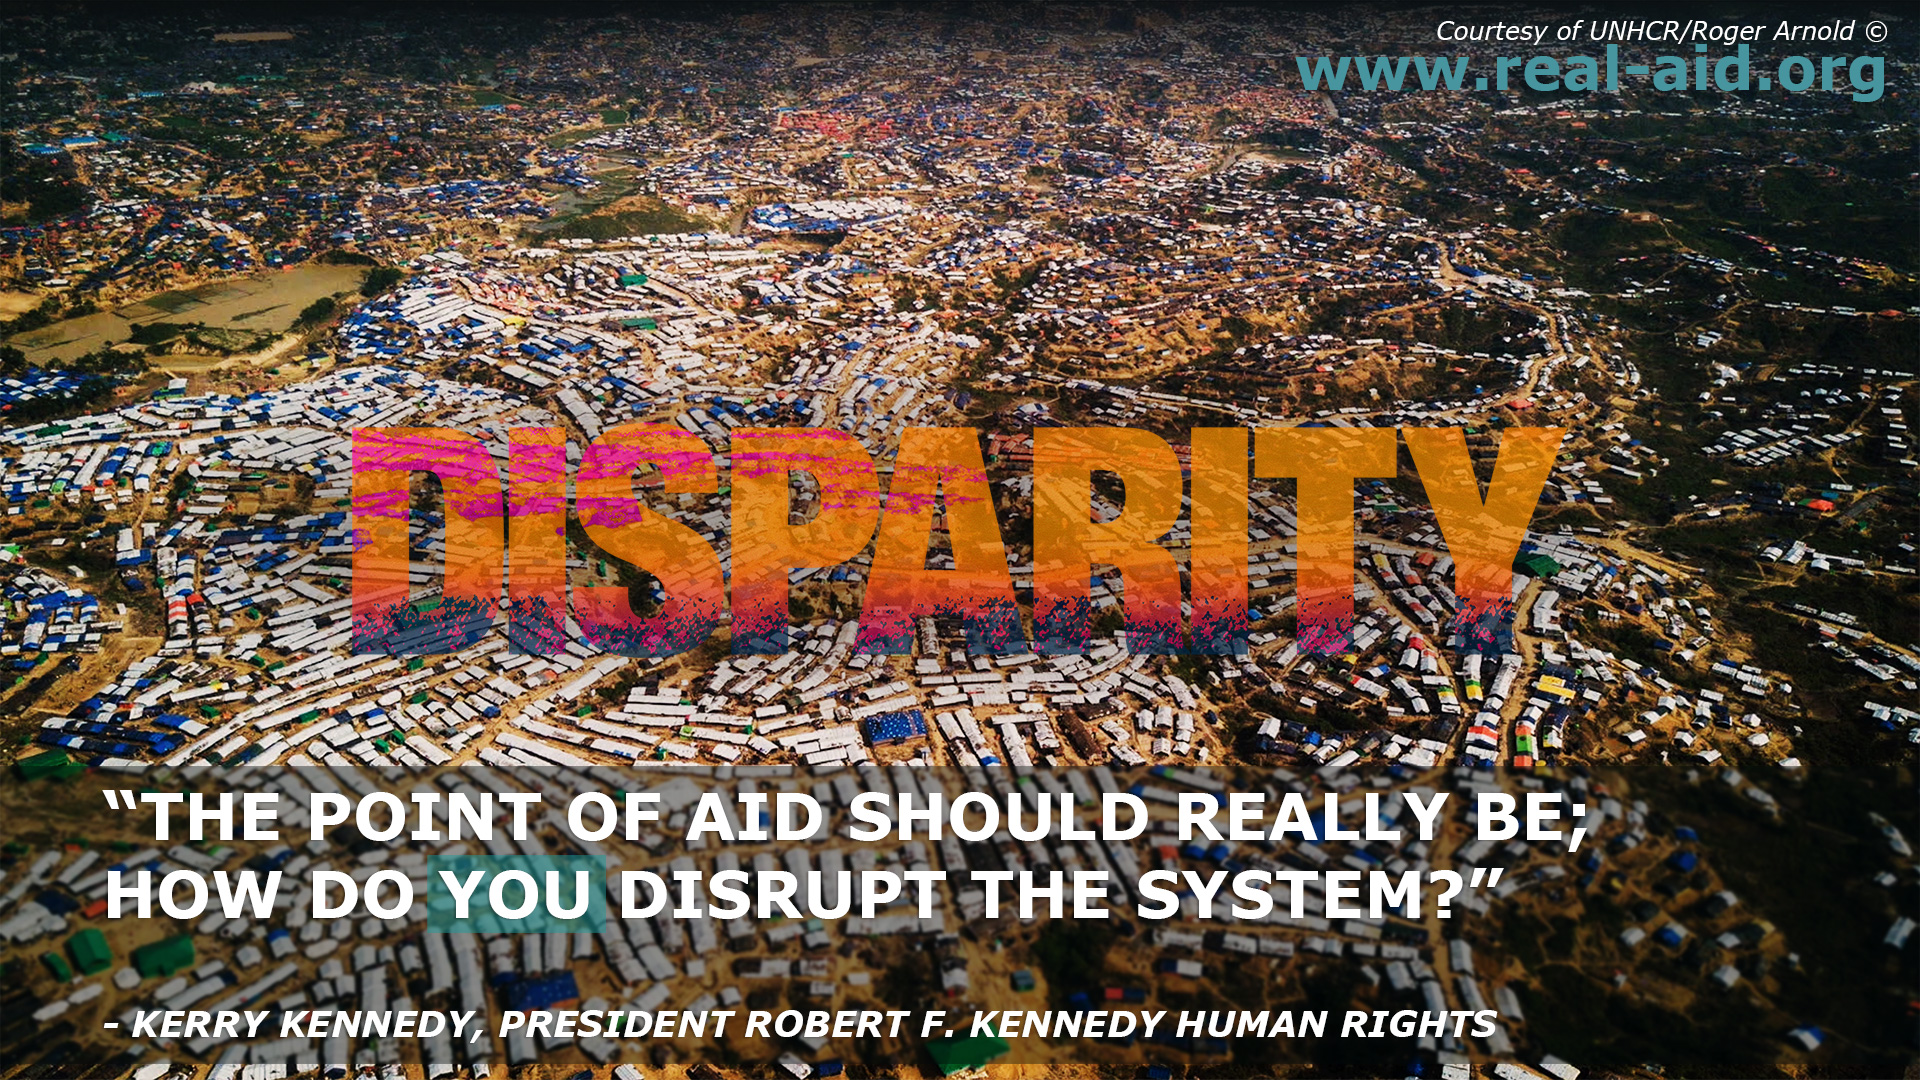 Disparity Film poster, the point of aid should really be how do you disrupt the system text, refugee aerial shot